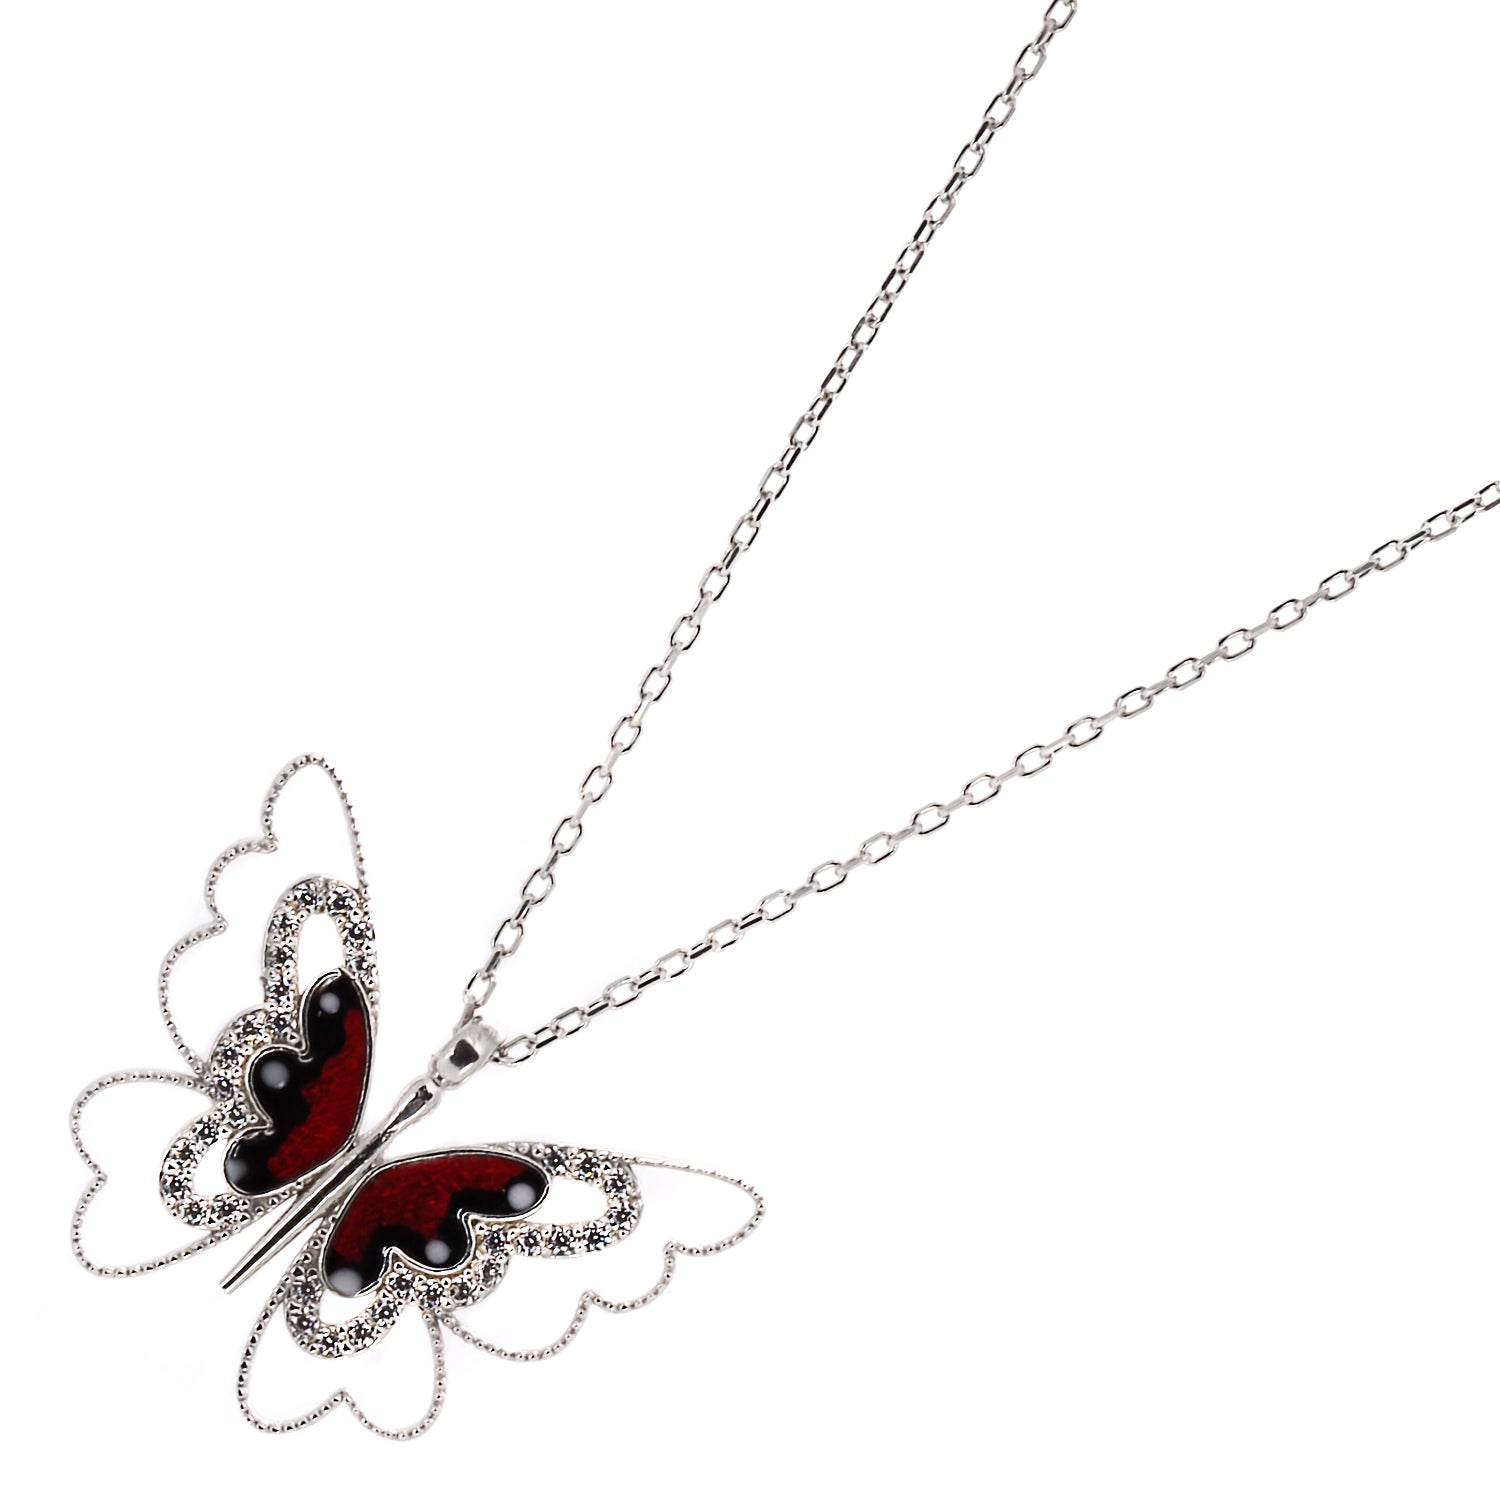 The sparkling zircon stone accentuating the beauty of the Sterling Silver Peace Red Butterfly Necklace.